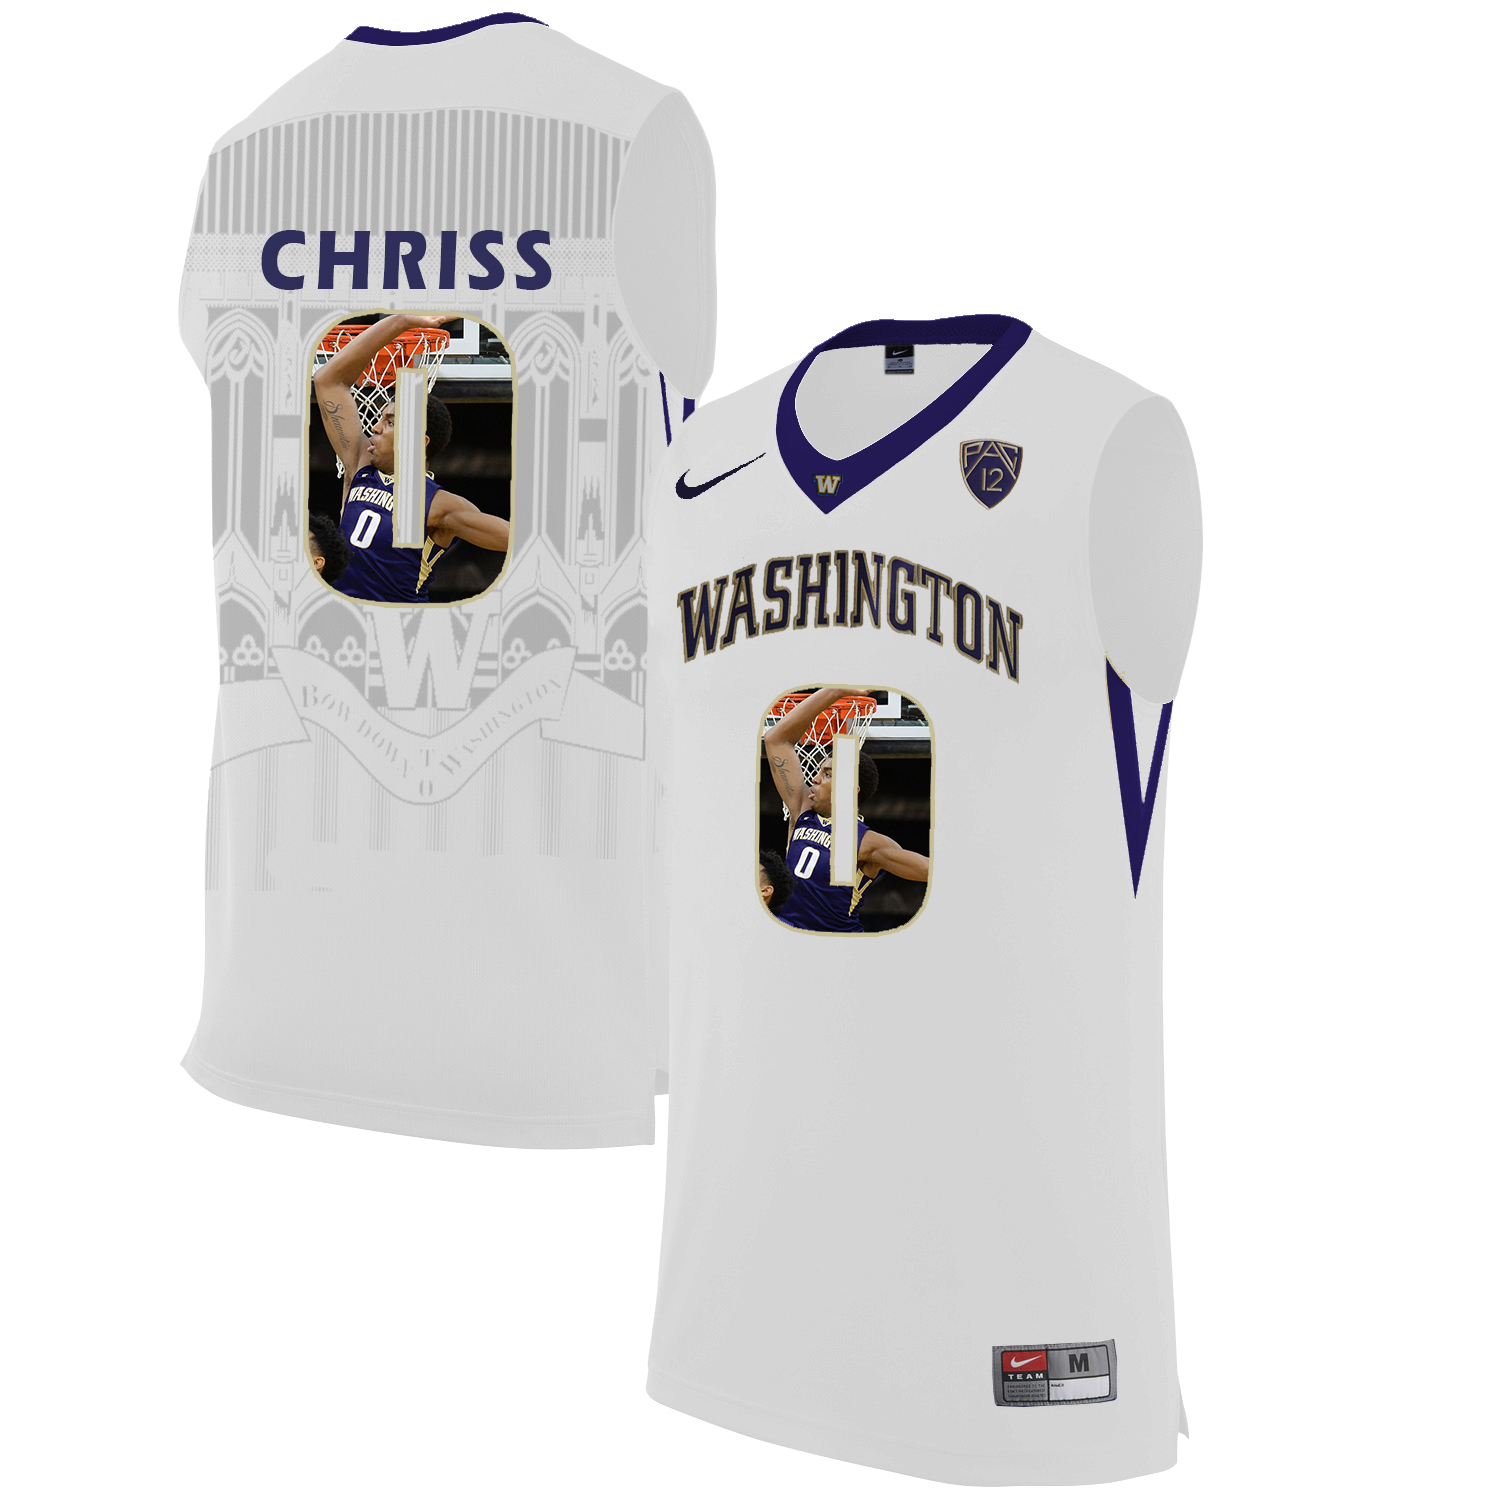 Washington Huskies 10 Marquese Chriss White With Portait College Basketball Jersey